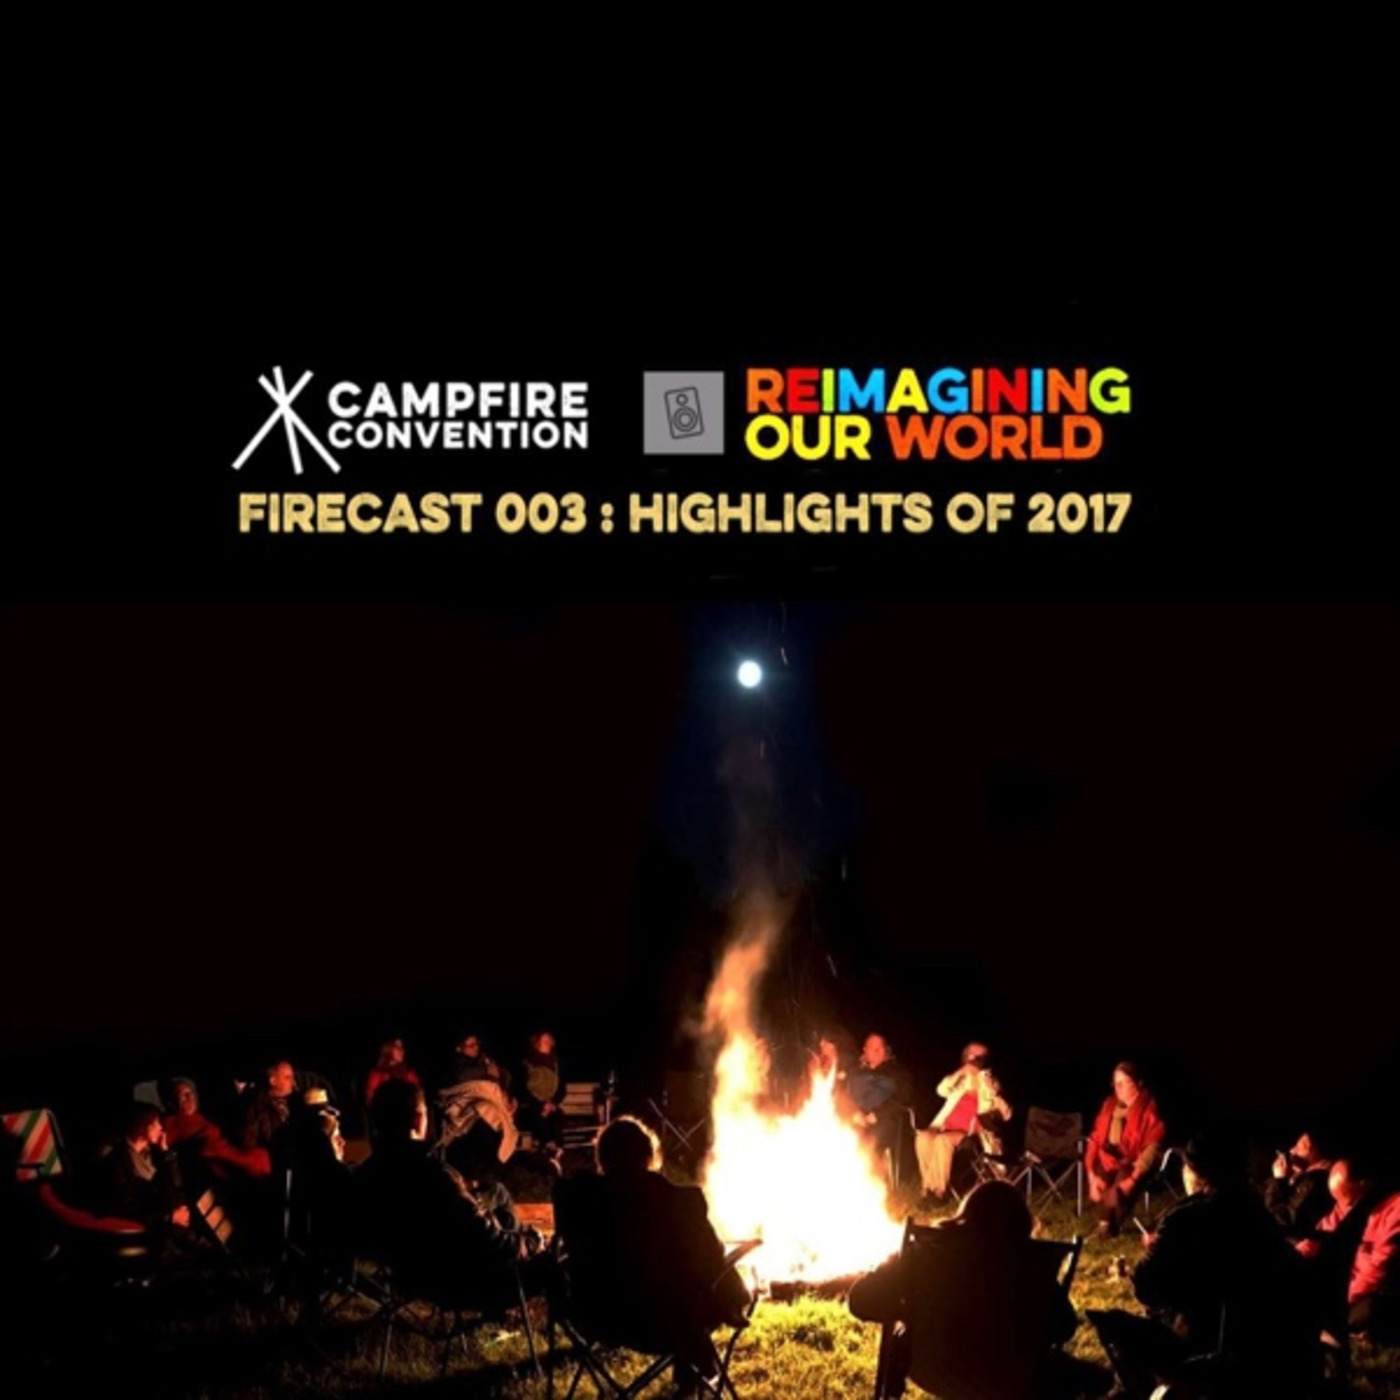 Firecast 003: Our members highpoints of 2017